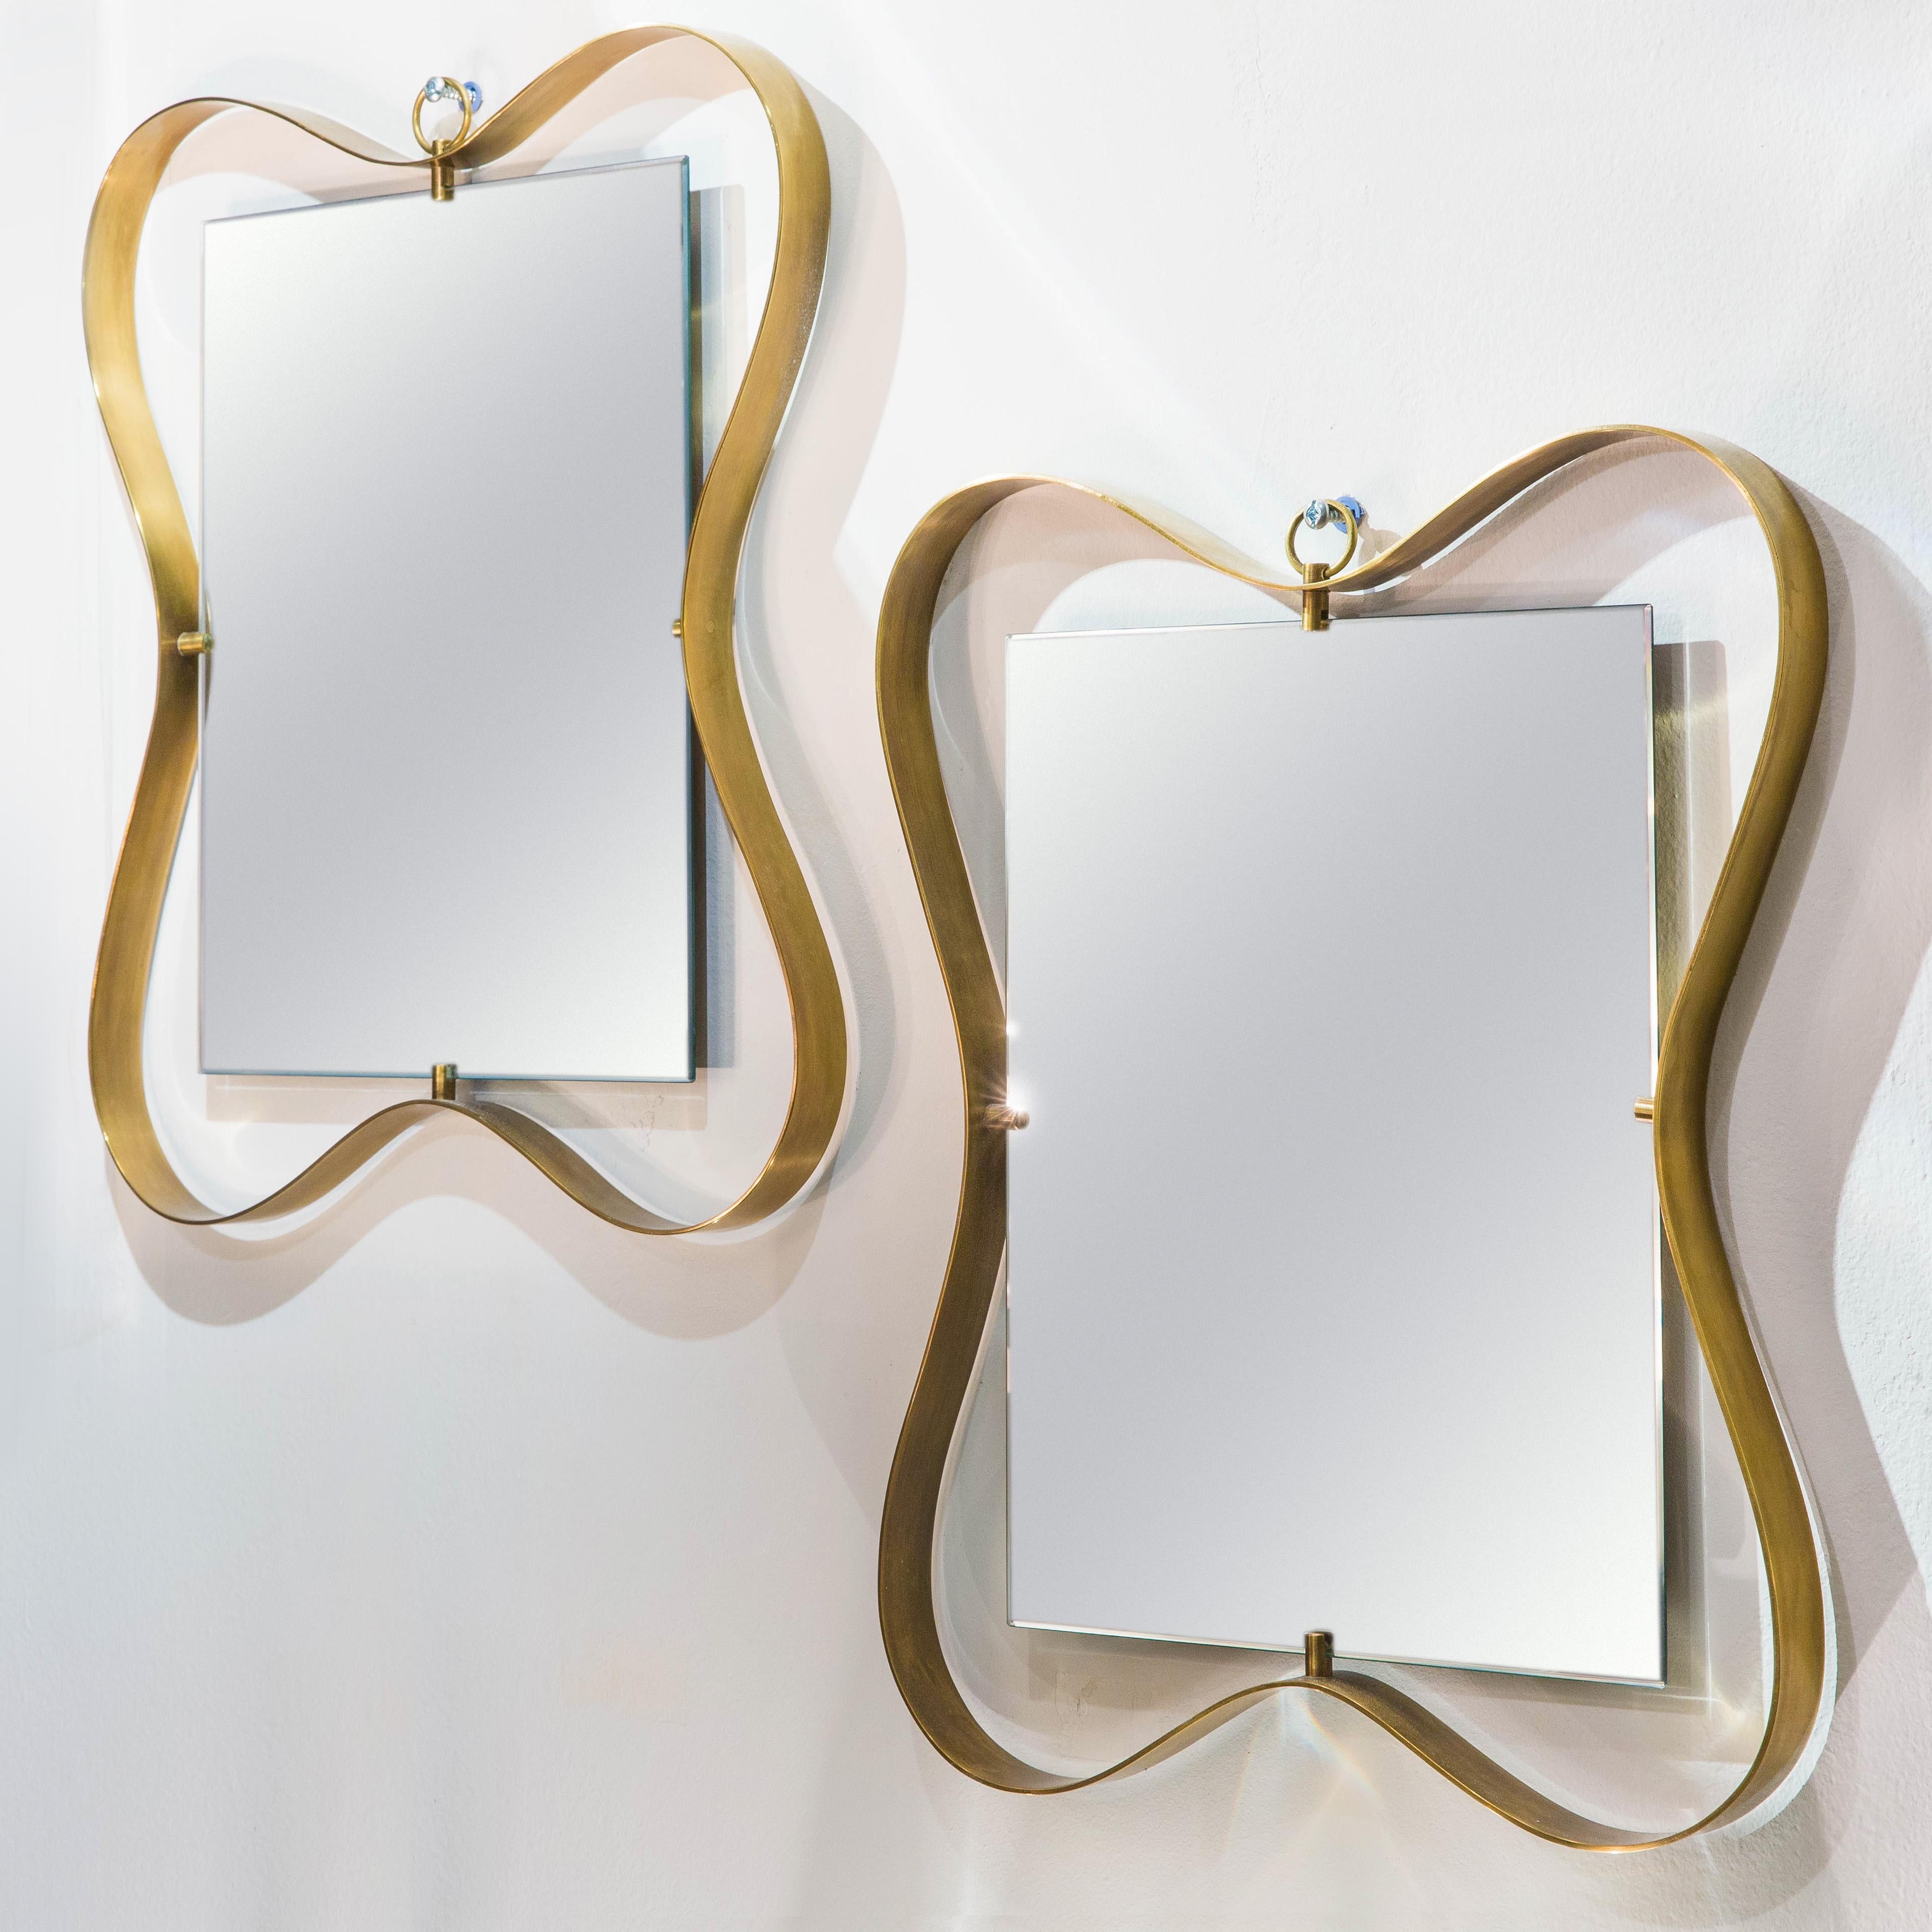 Fontana Arte pair of whimsical and elegant mirrors with curved patinated brass frame holding beveled mirrored glass, Italy, circa 1950.

Second mirror is available to make a pair.

Literature
Lastre di Vetro e Cristallo, No. 10, August 1950